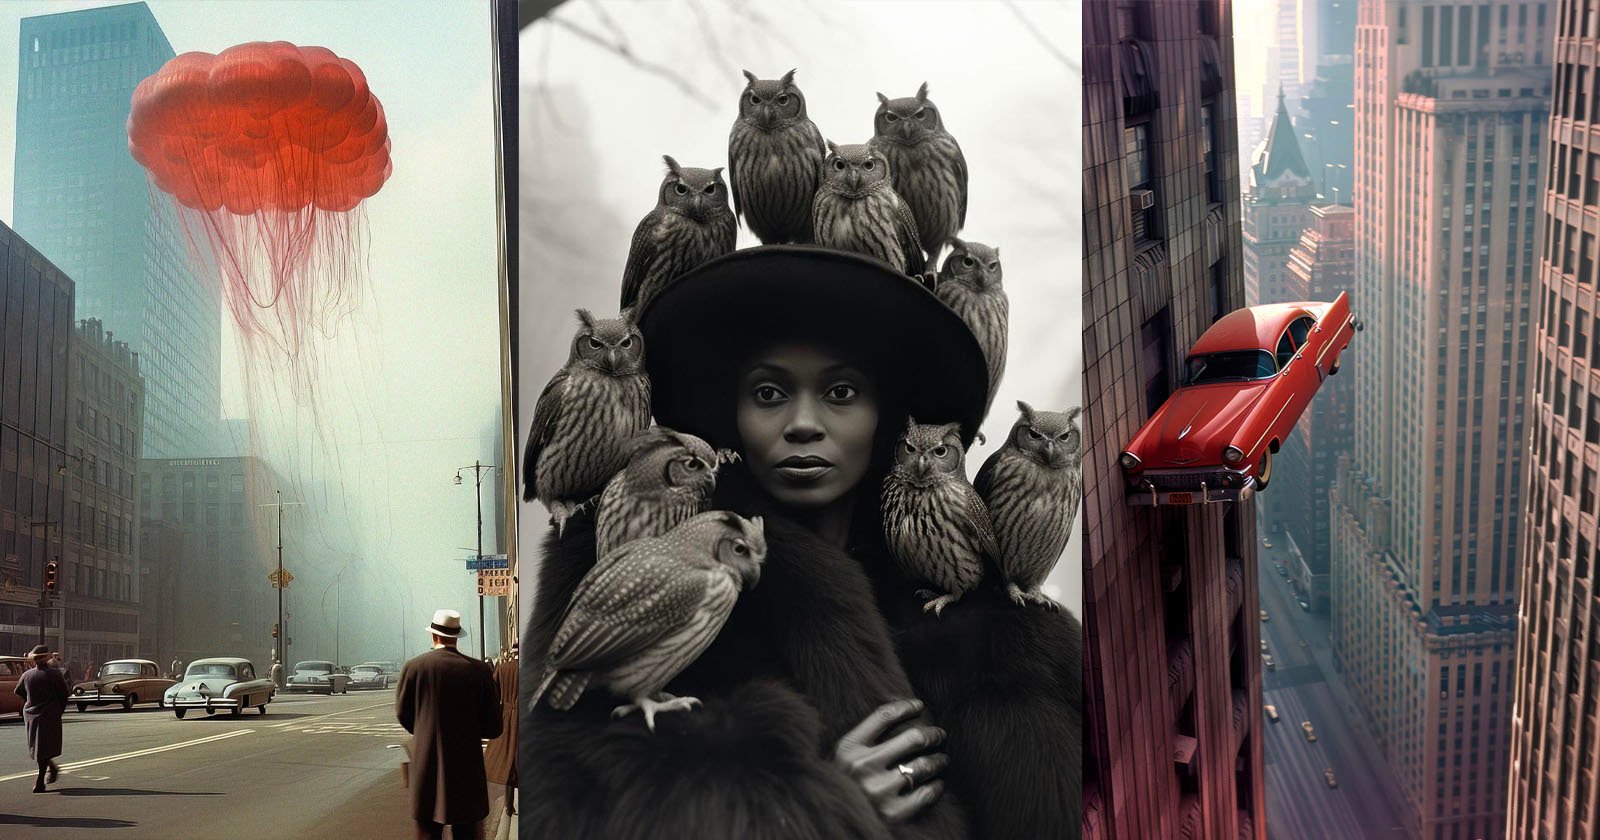 A triptych with surreal scenes: a jellyfish-like entity floats above a vintage city scene, a woman surrounded by perched owls, and a car vertically parked on a skyscraper.